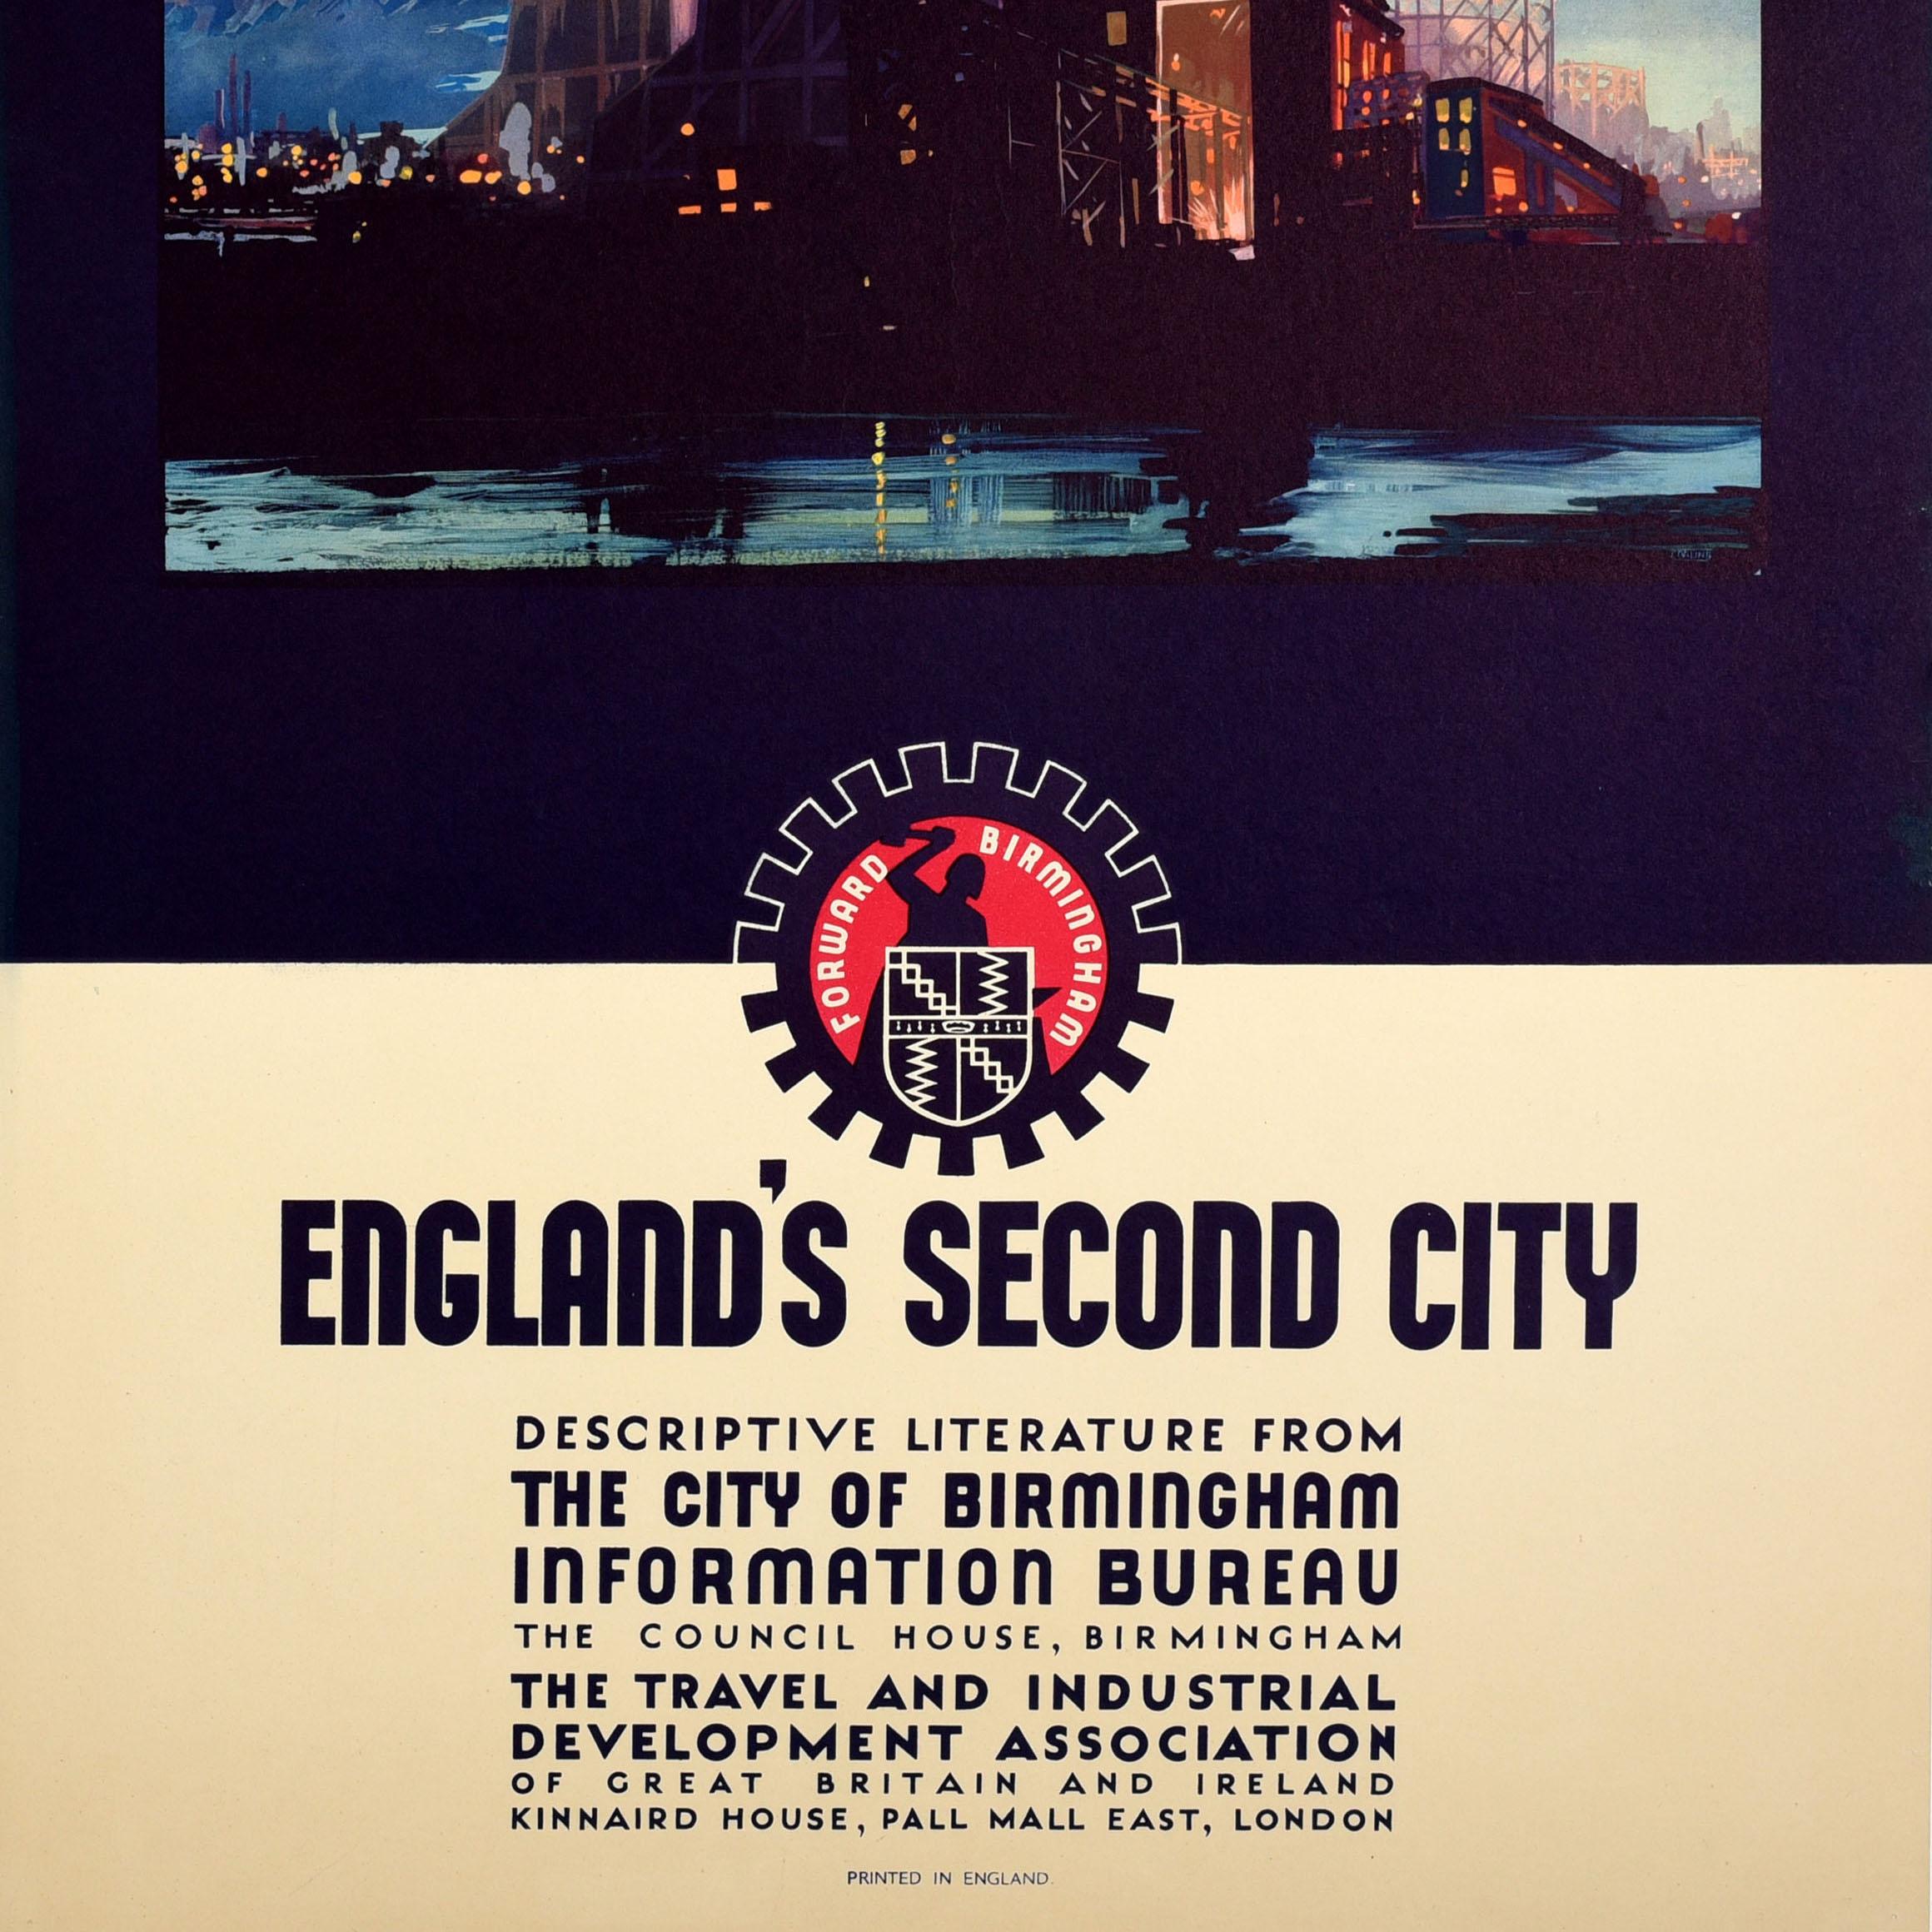 what is england's second city